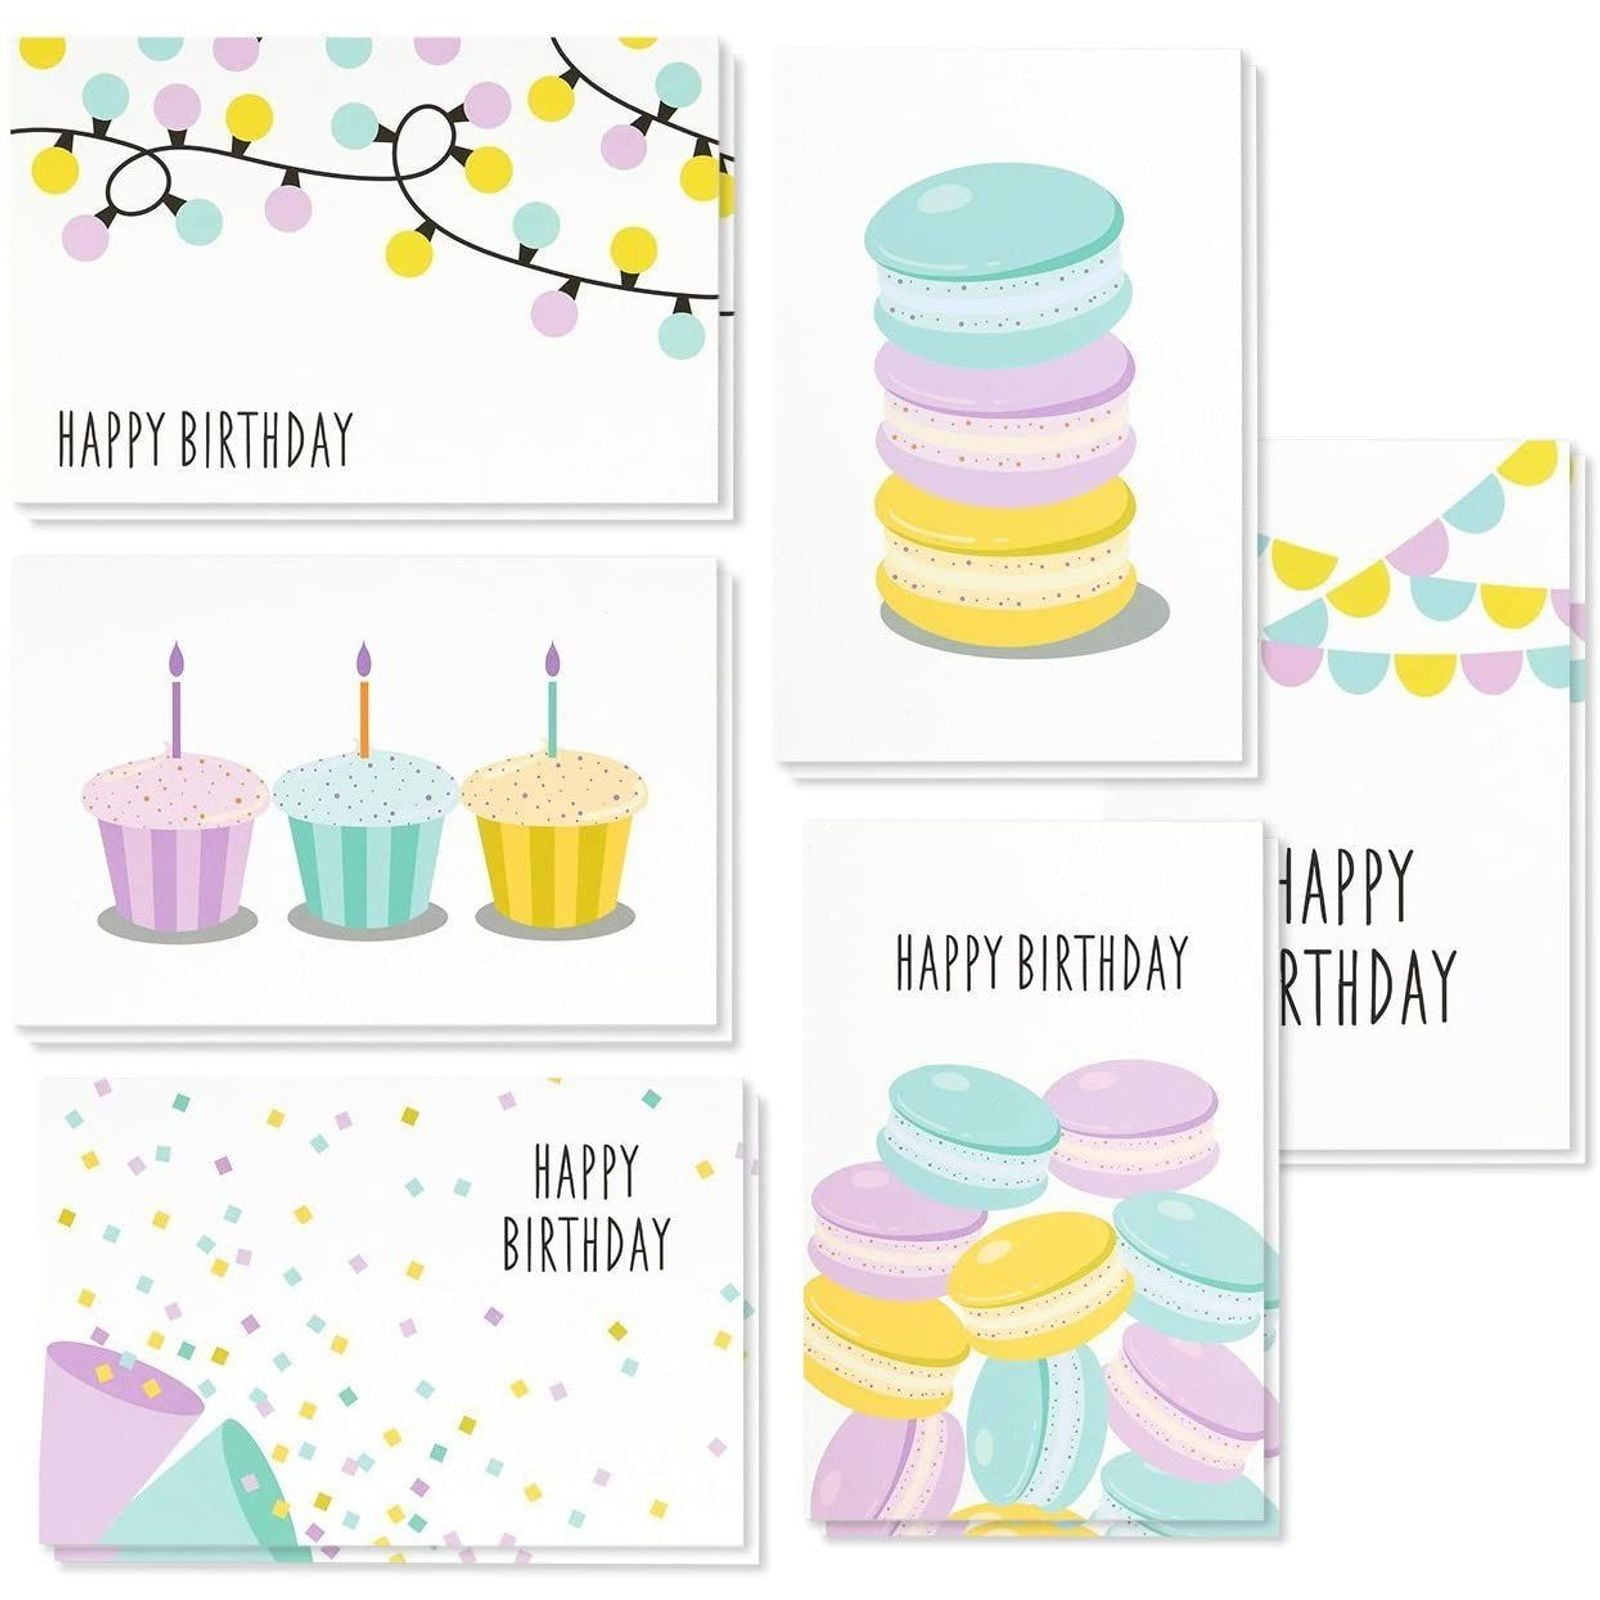 Playhouse Pretty in Pink Special Embellished Set of 6 Birthday Cards and Envelopes